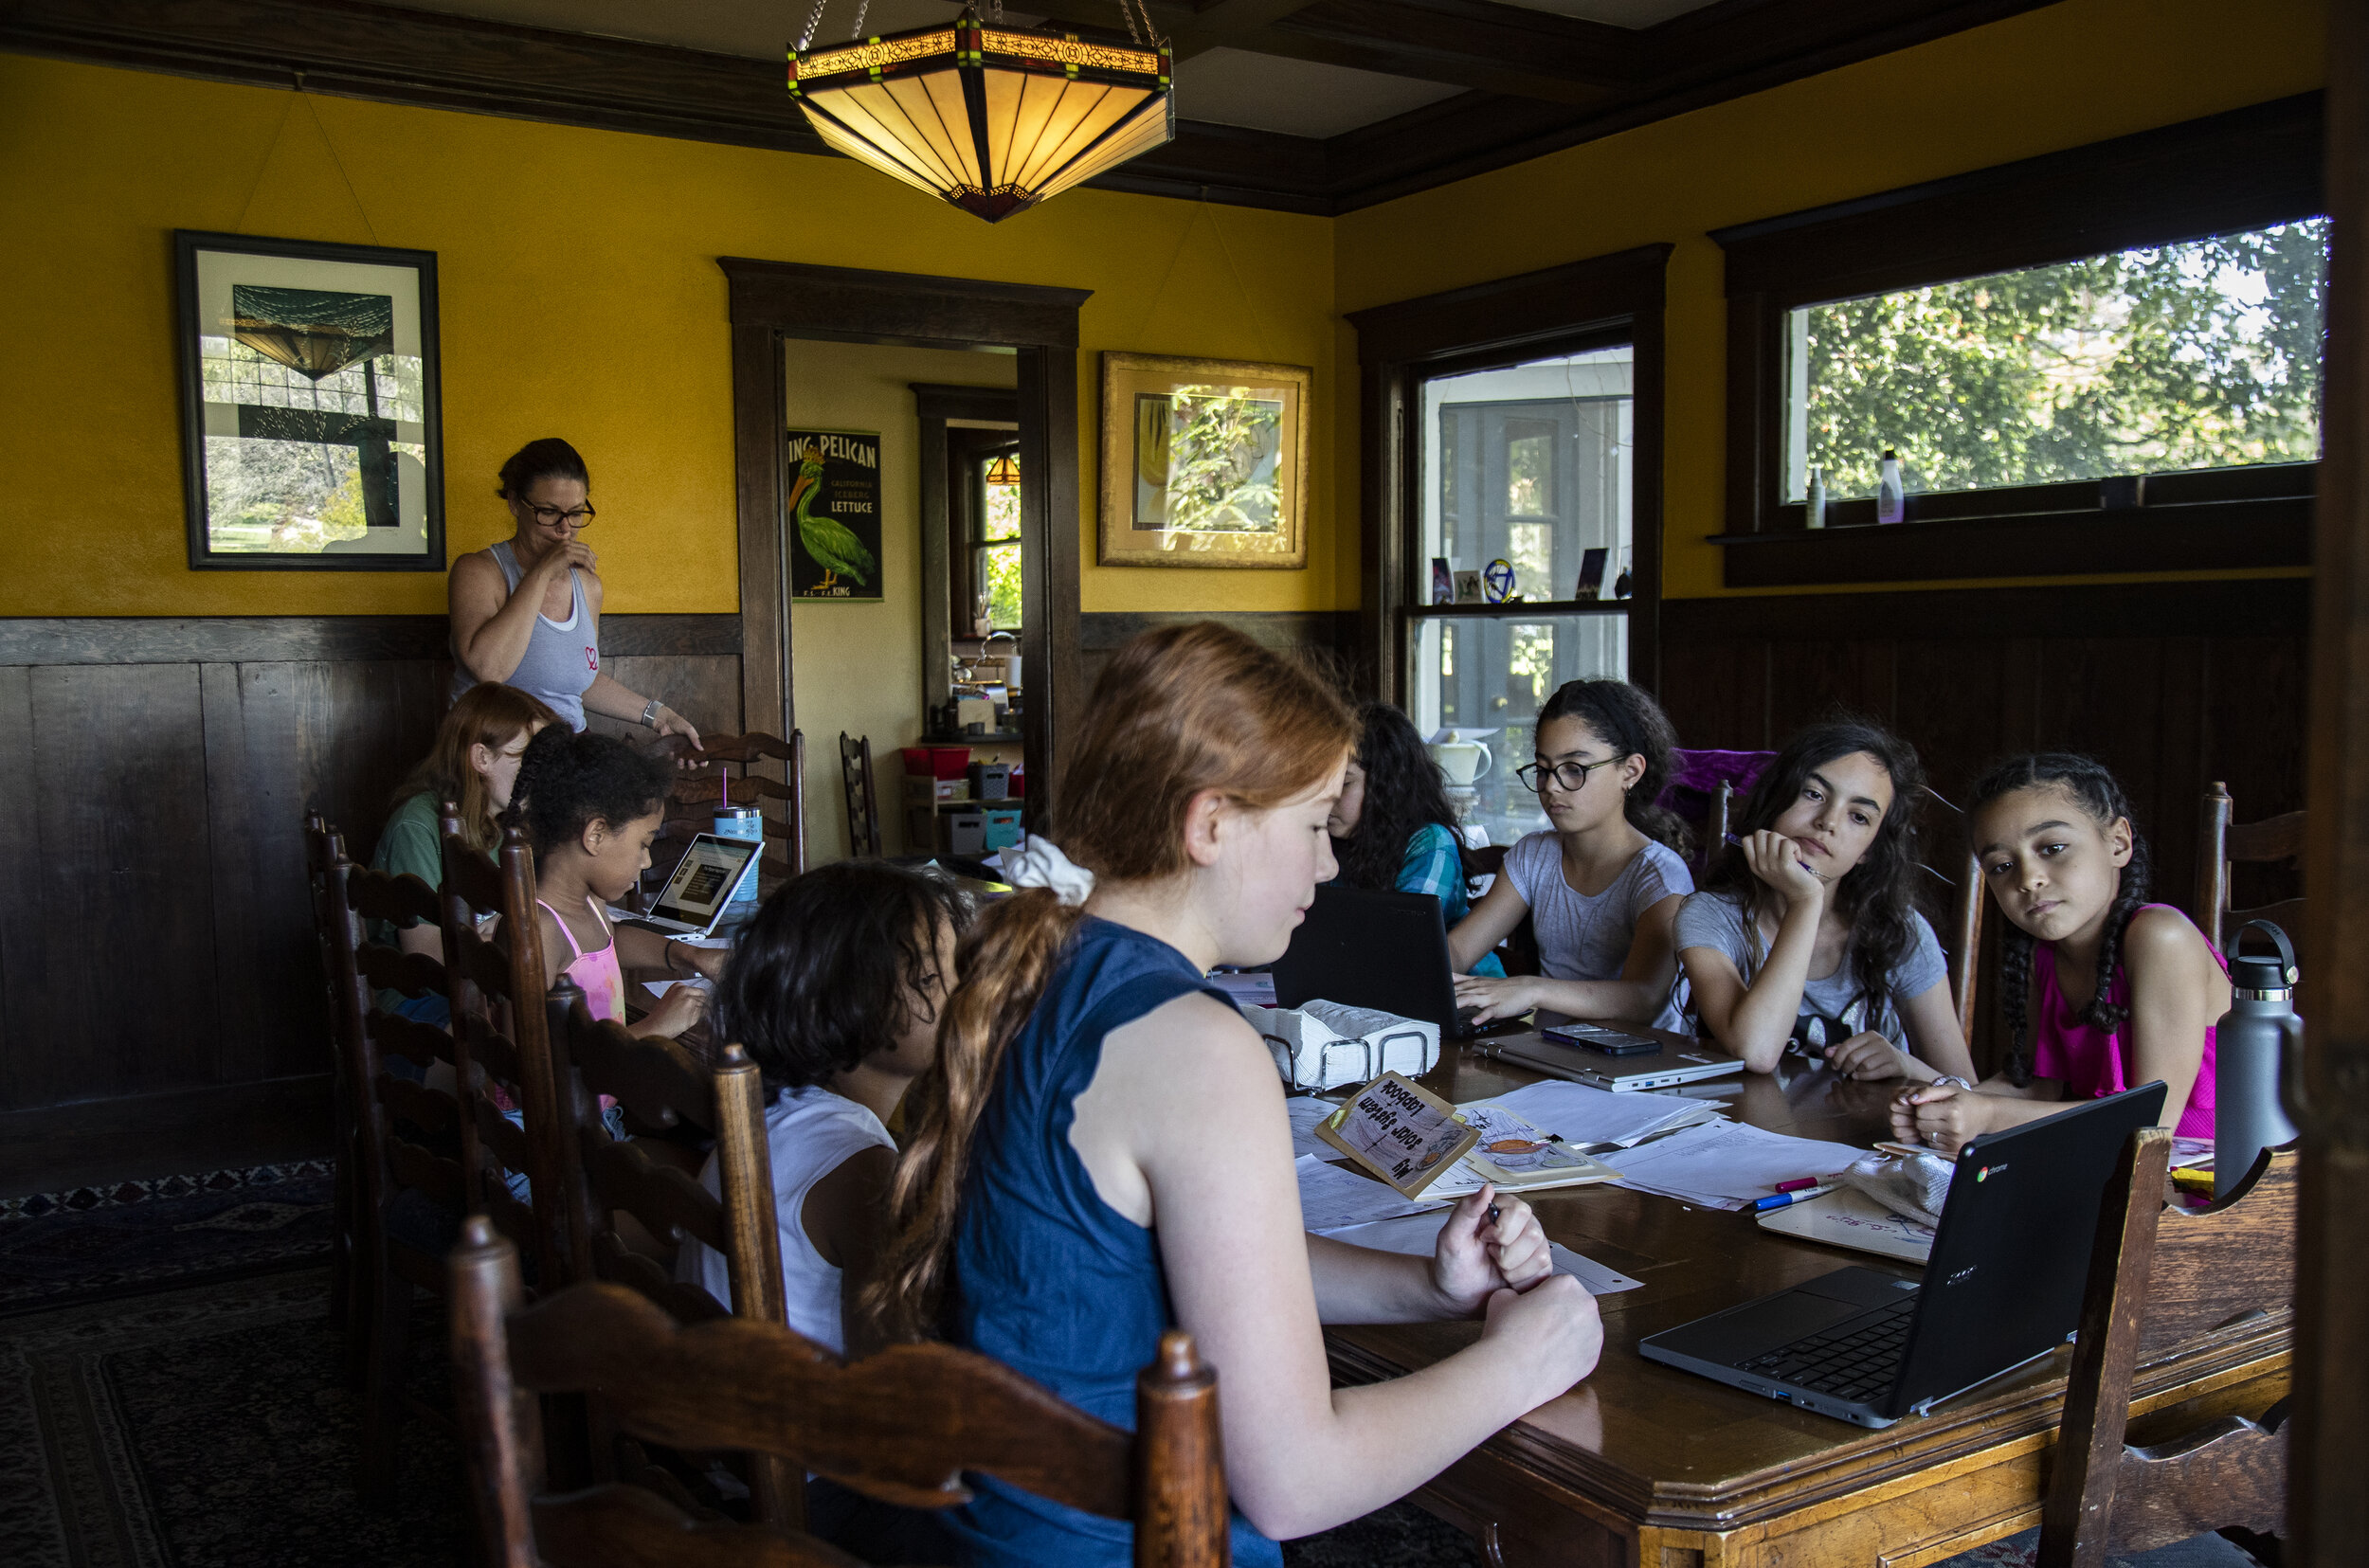  RIVERSIDE, CA- APRIL 23, 2020: Ellie Bristow, left, gives her science presentation to the class at the Roth’s dining room table home school in the midst of the coronavirus pandemic on April 23, 2020 in Riverside, California. The Bristow’s, Roth’s an